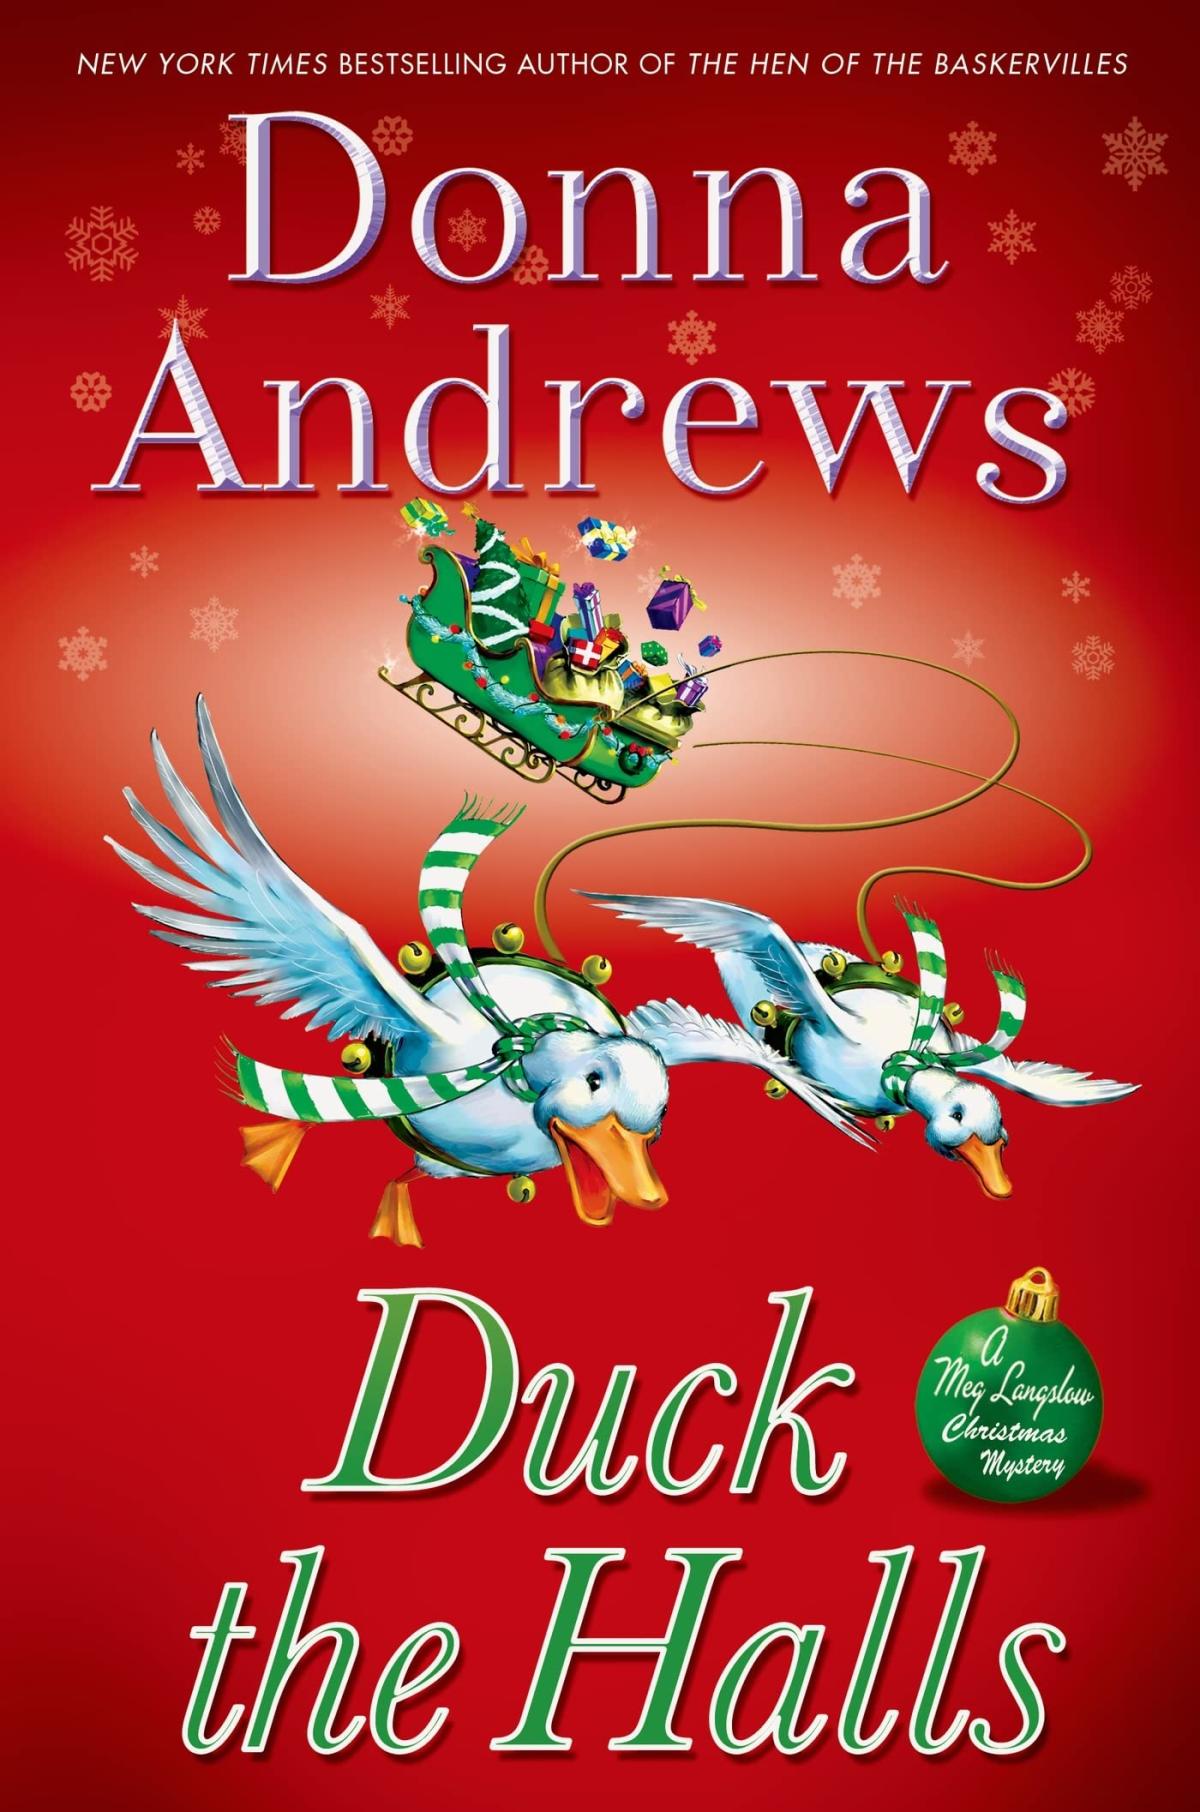 Duck the Halls by Donna Andrews